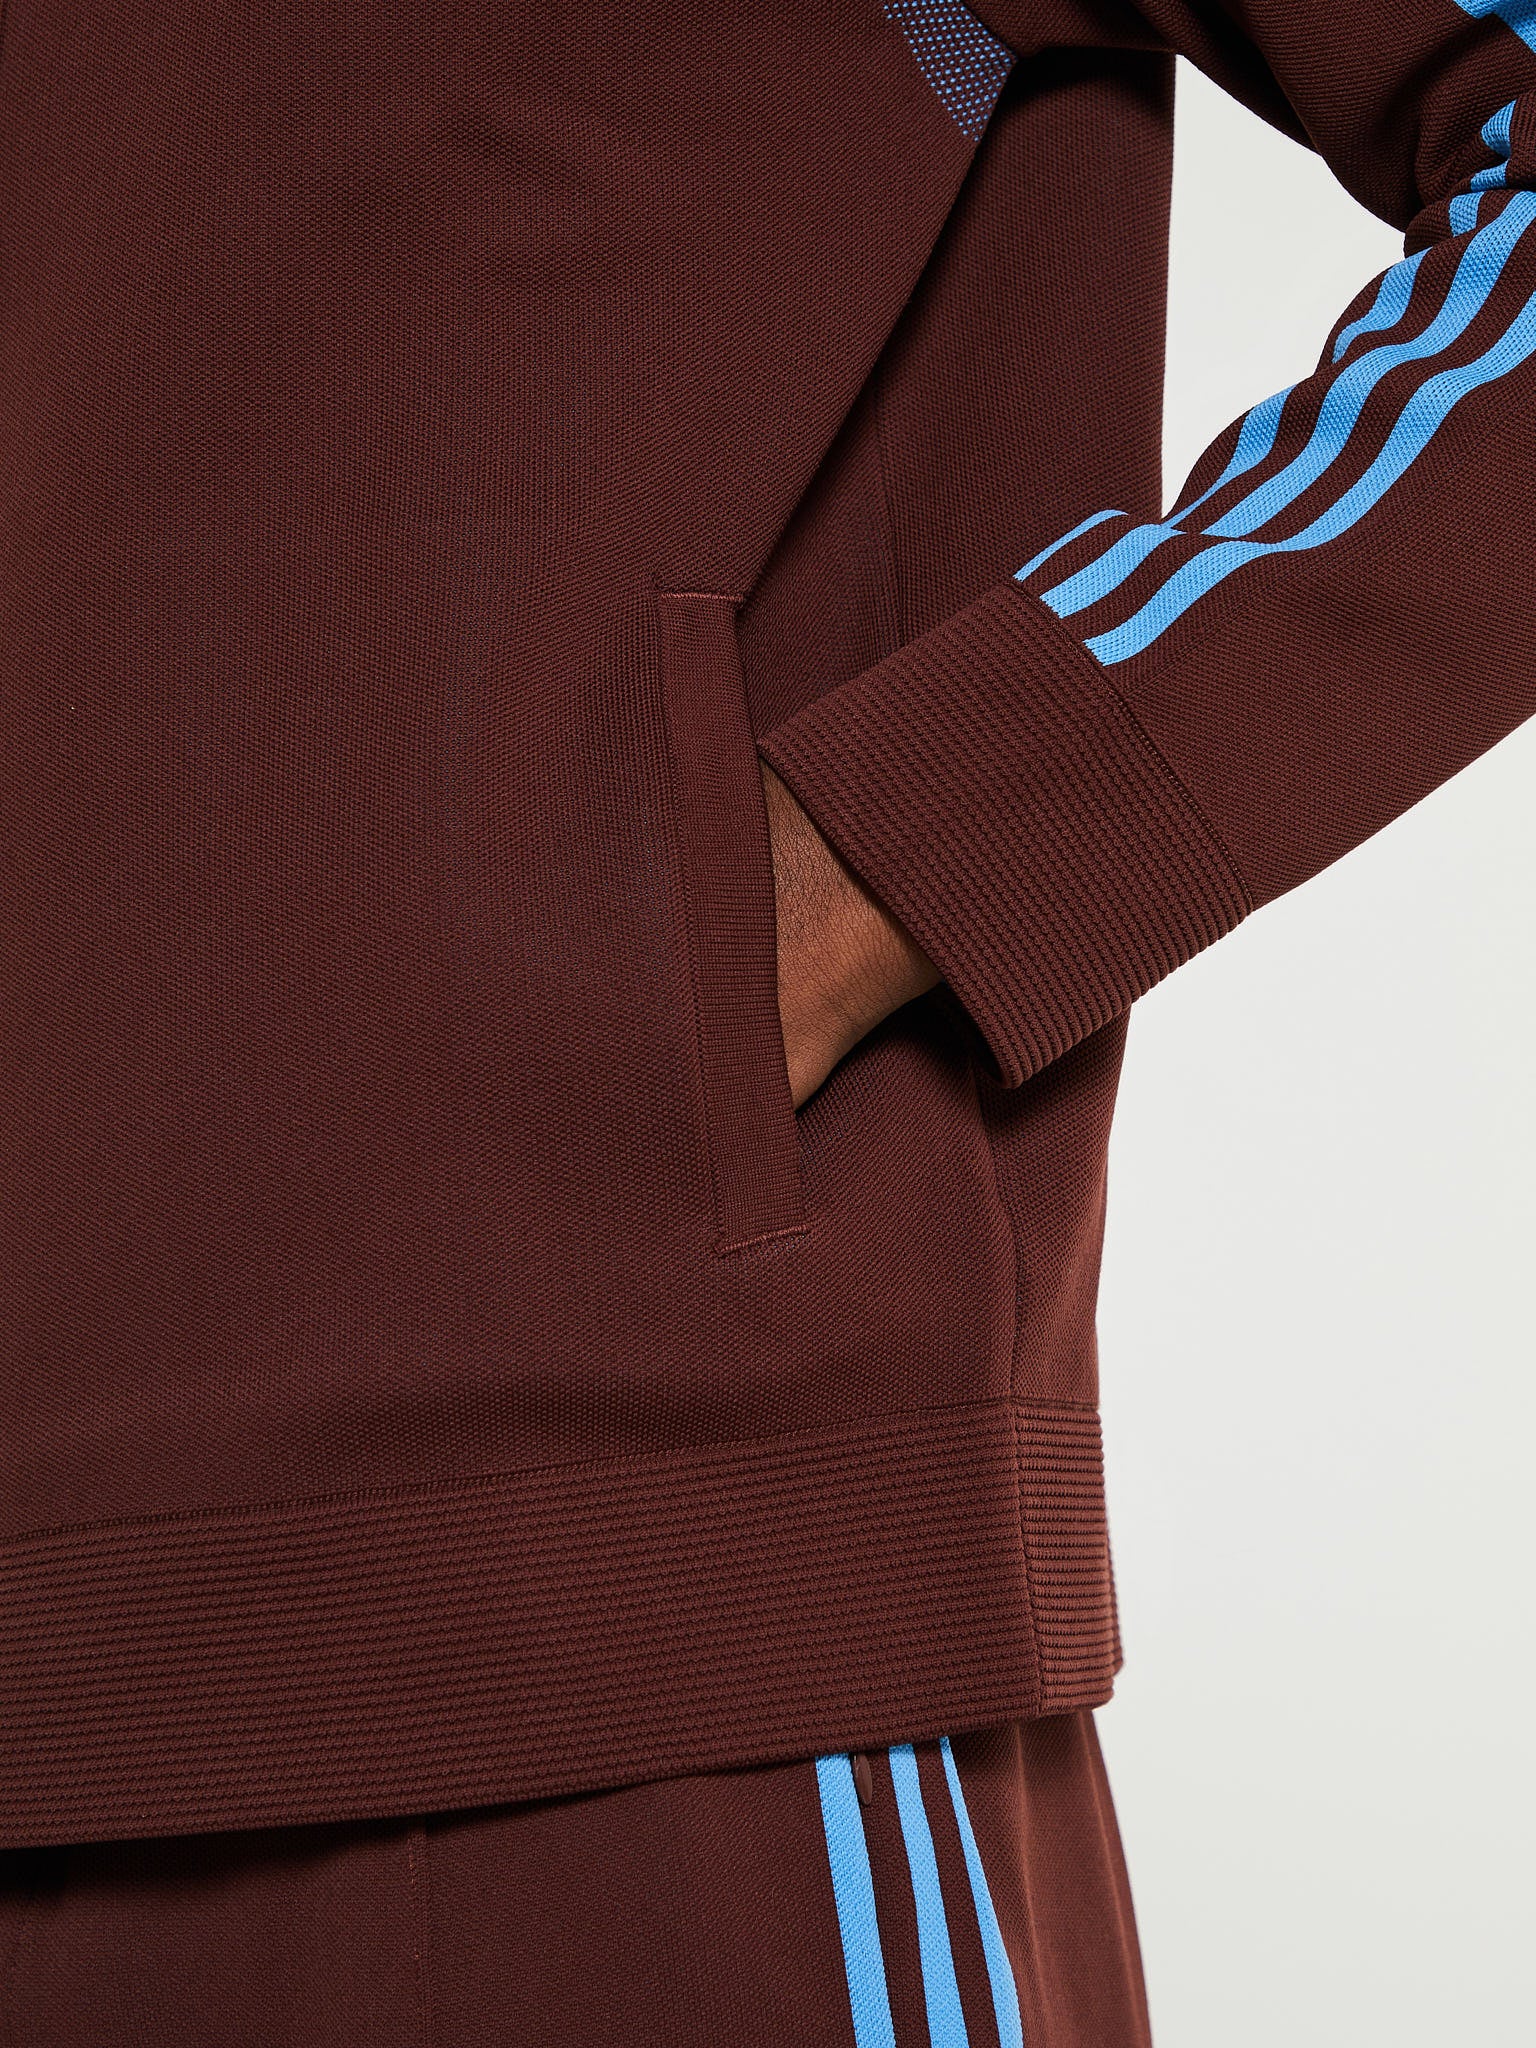 adidas Originals by Wales Bonner Knit Track Jacket (Mystery Brown) - IT9780  - Consortium